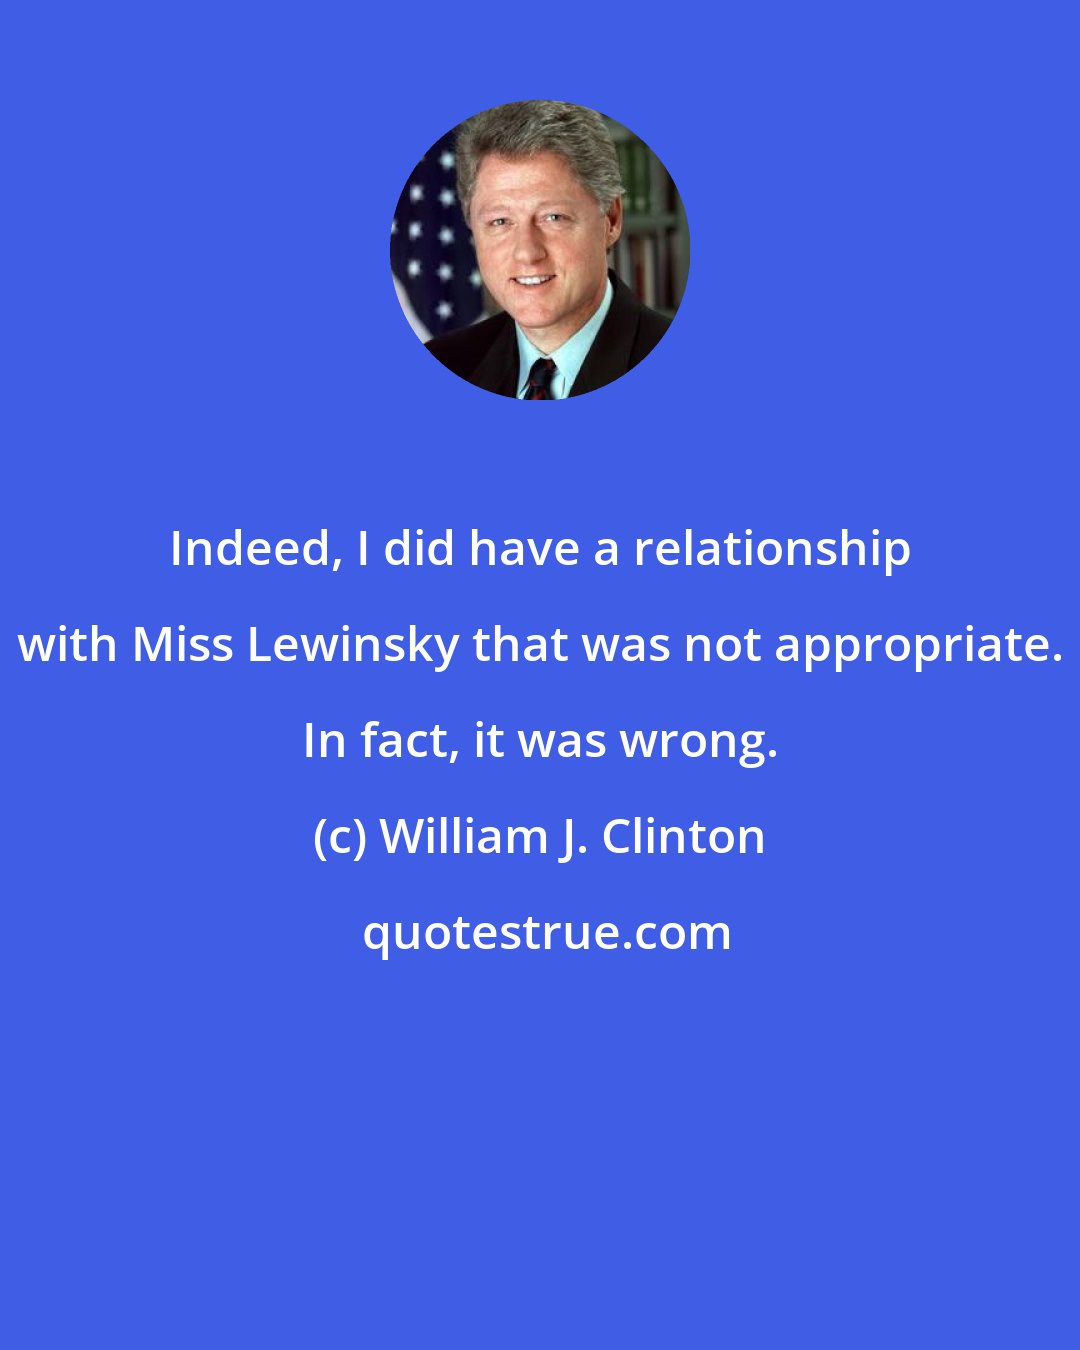 William J. Clinton: Indeed, I did have a relationship with Miss Lewinsky that was not appropriate. In fact, it was wrong.